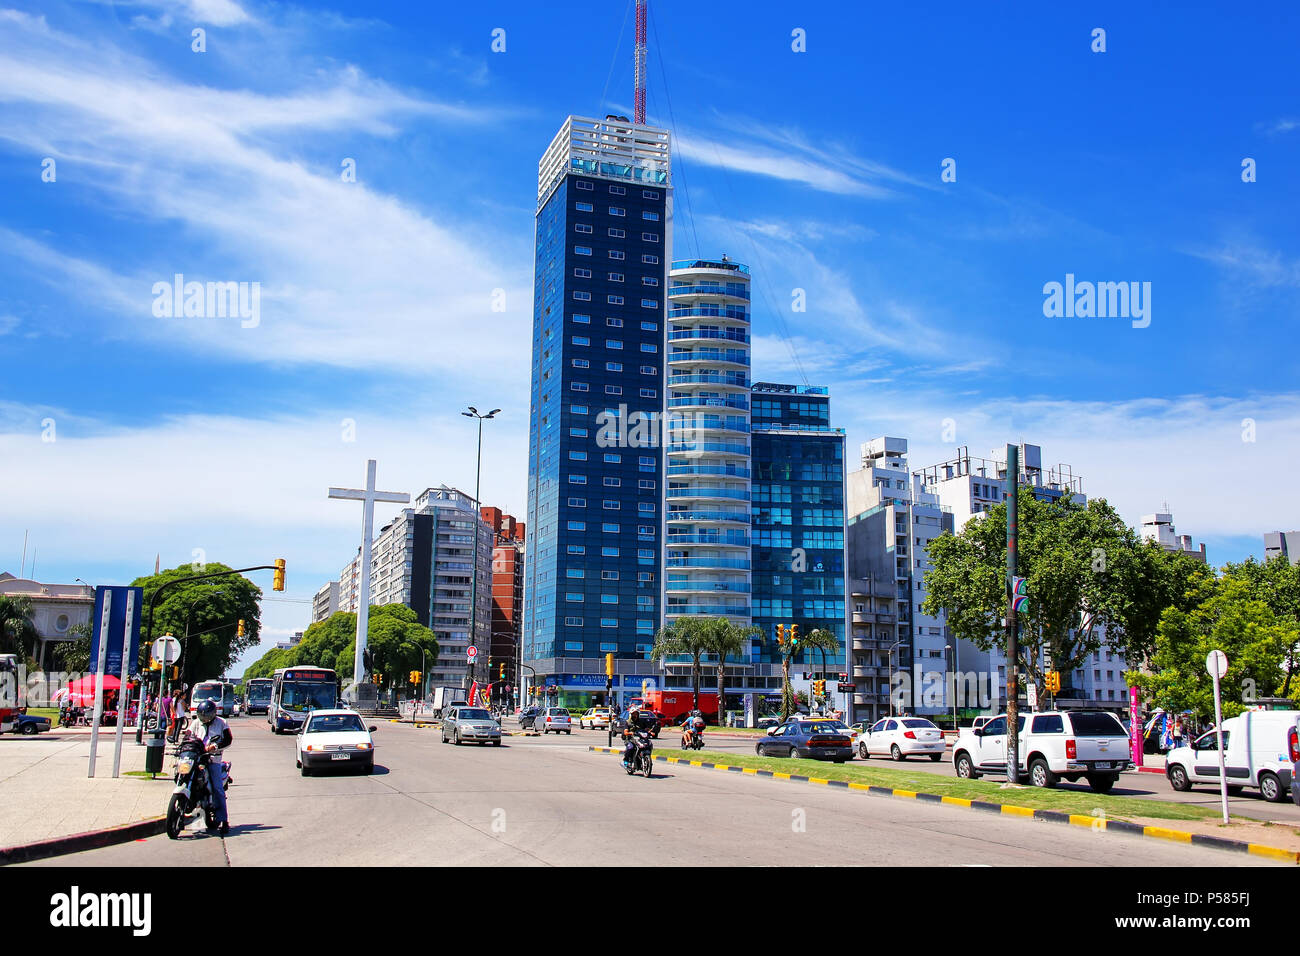 Tres Cruces district of Montevideo with Torre del Congreso, Uruguay. Montevideo is the capital and largest city of Uruguay. Stock Photo